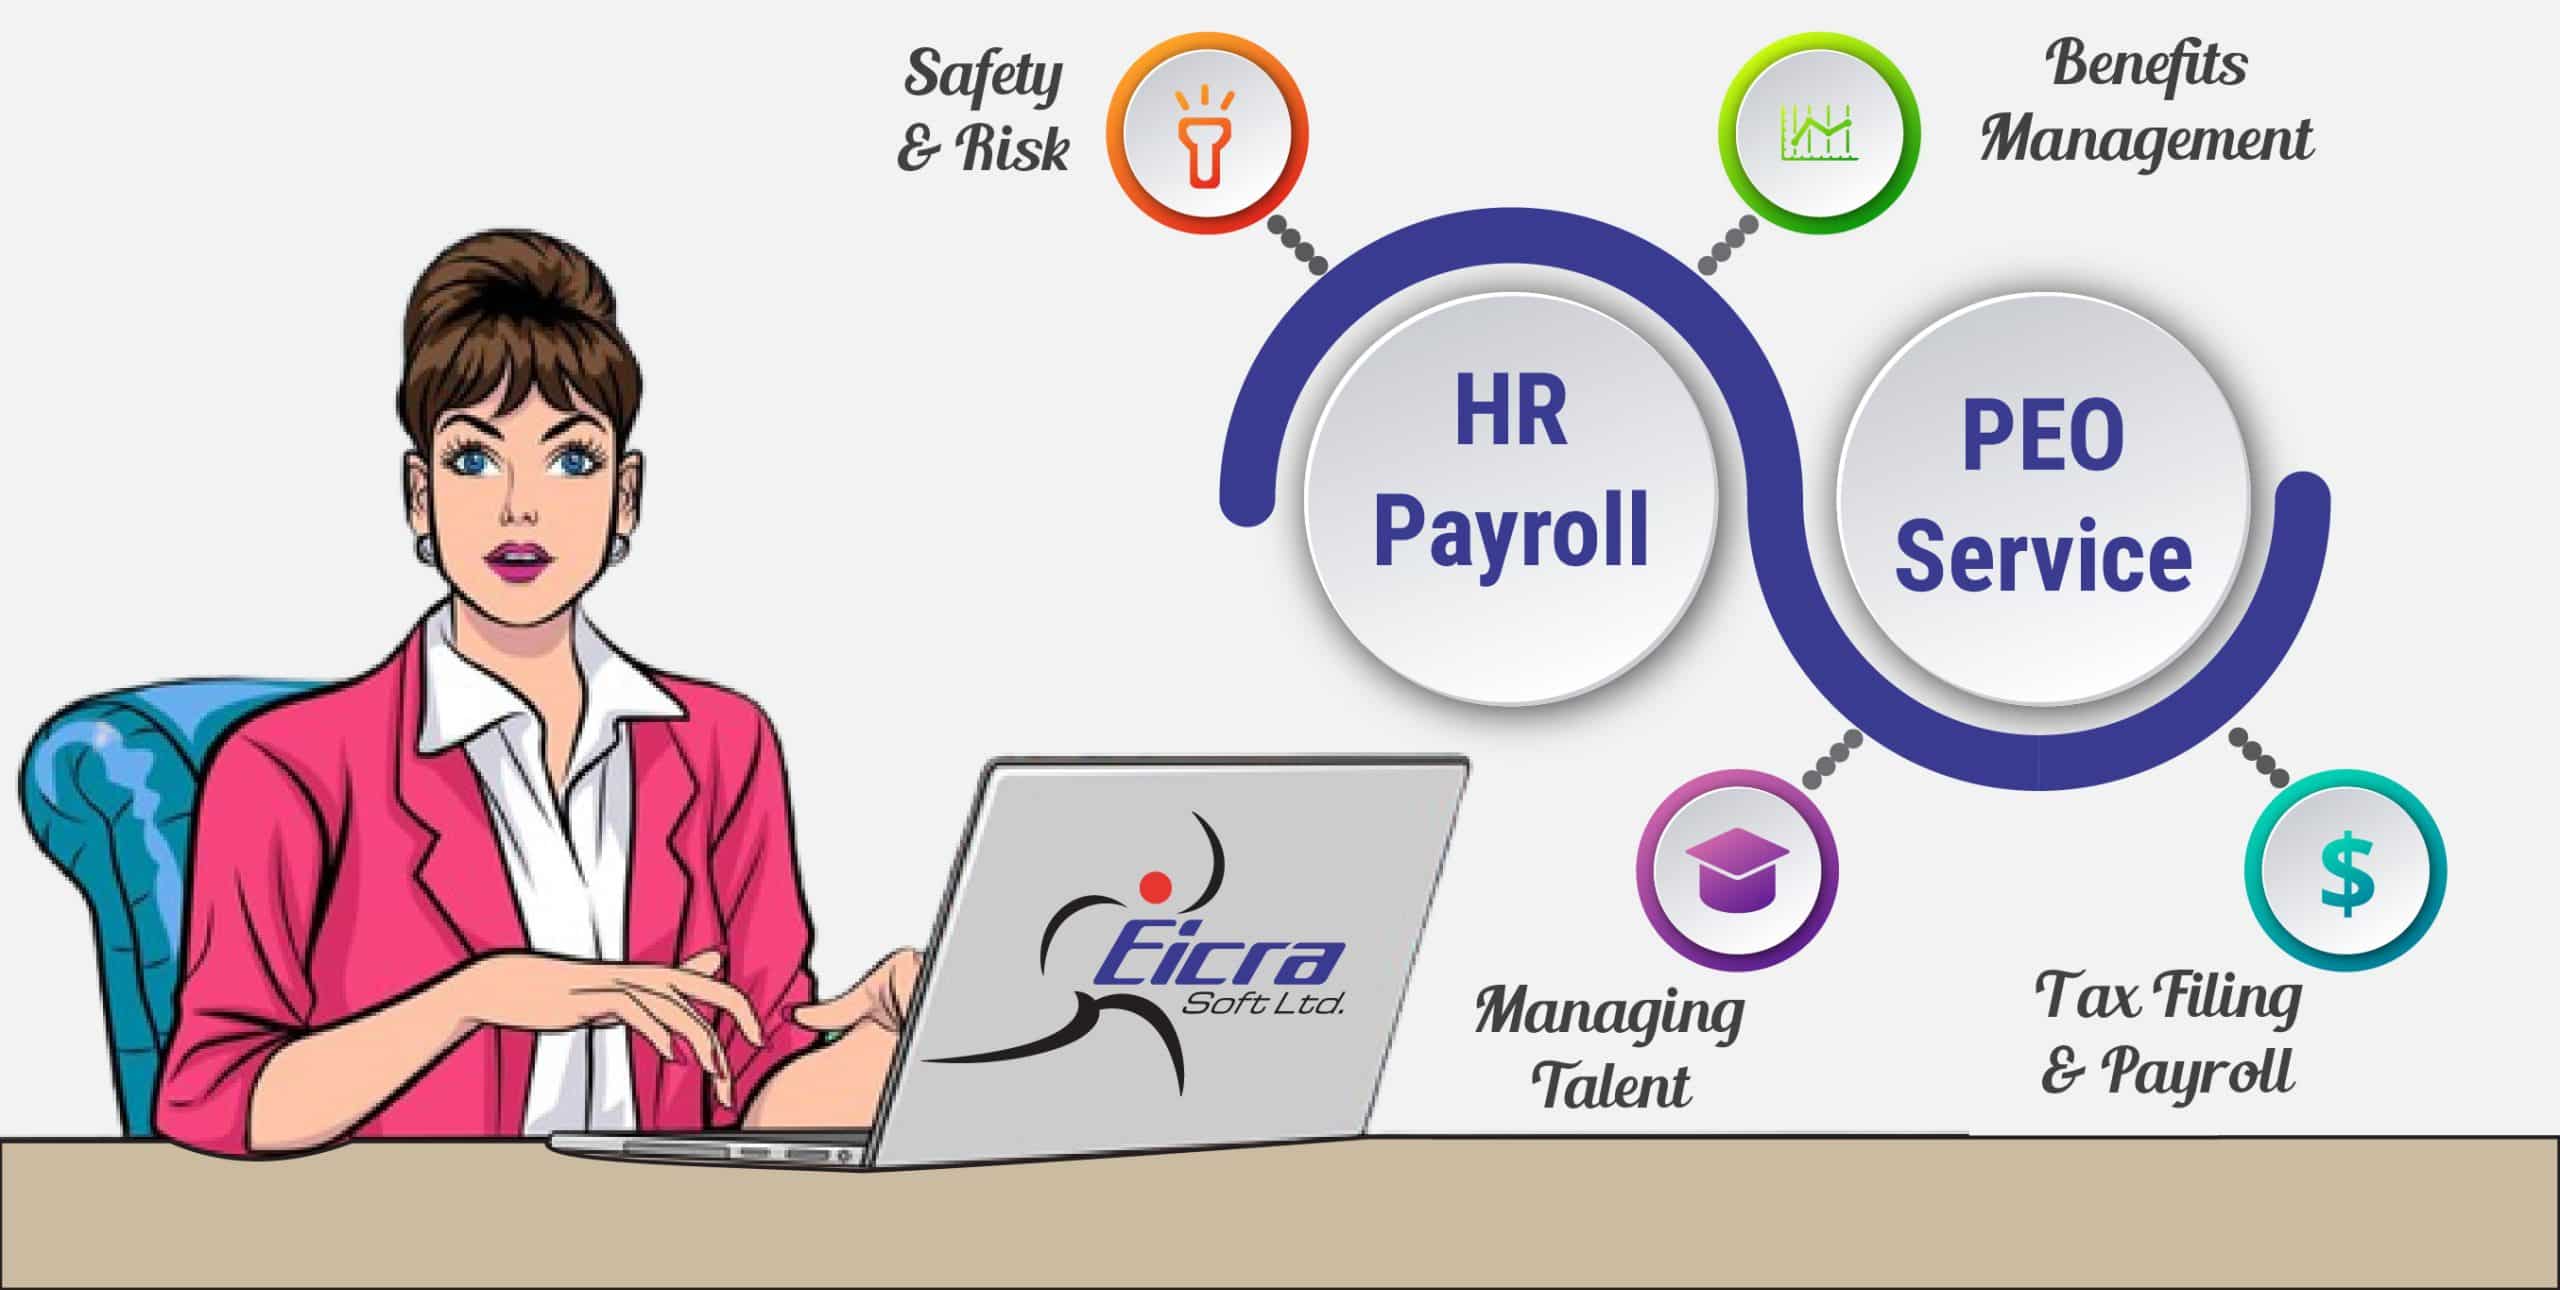 Outsource HR Payroll and PEO Service